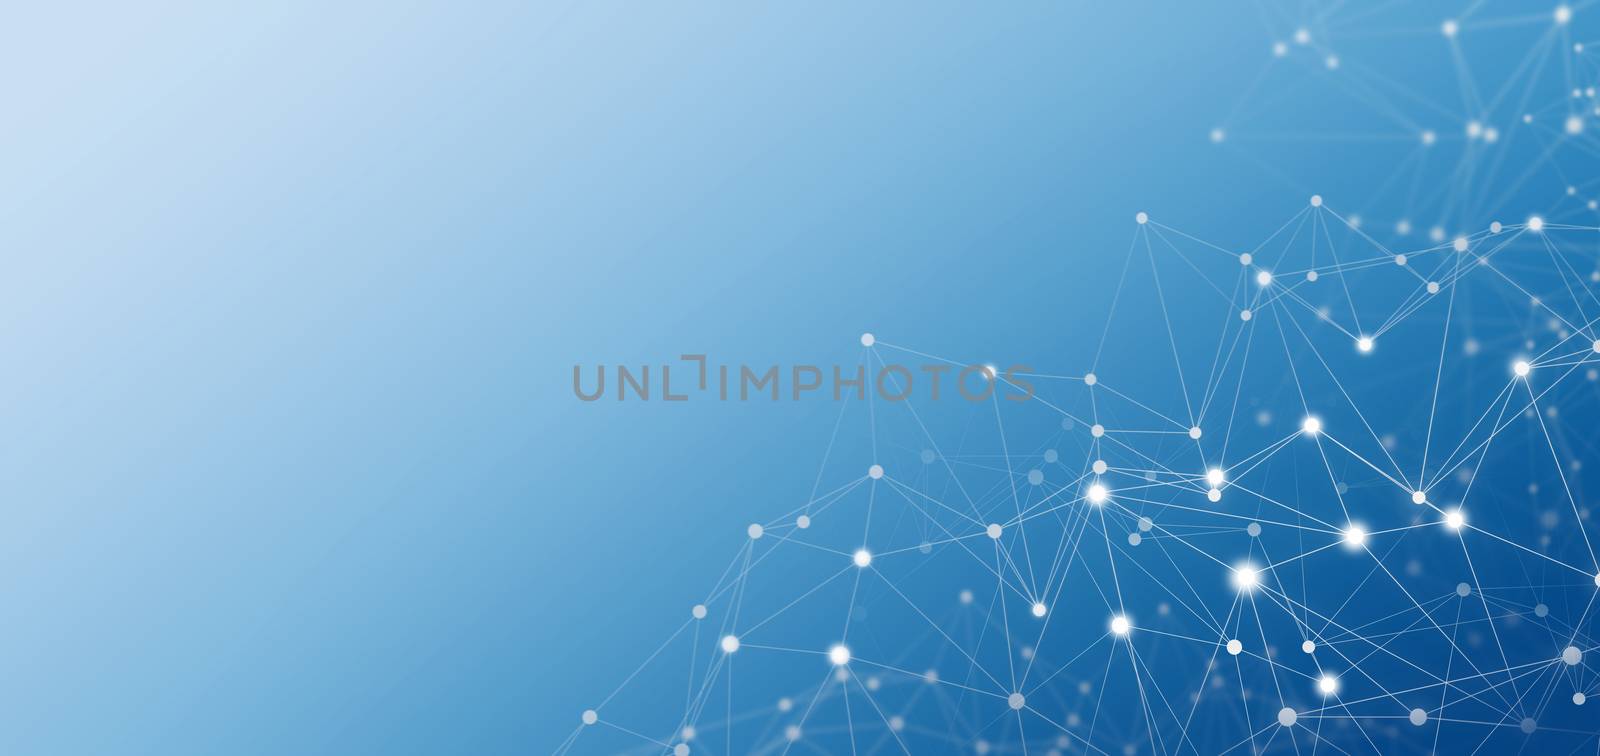 Abstract global network connection background illustration